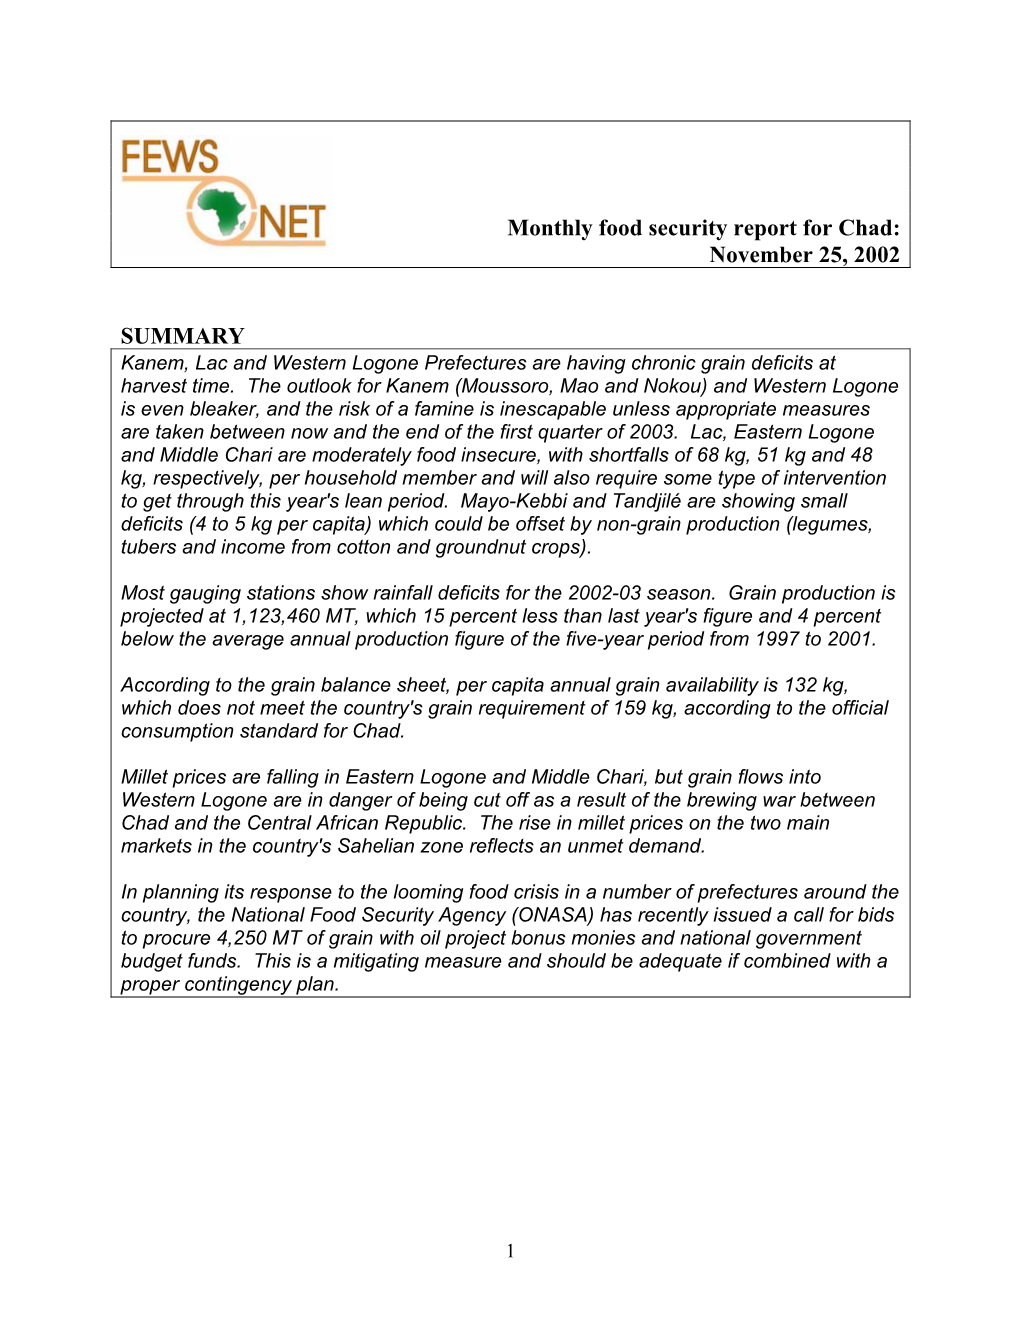 Monthly Food Security Report for Chad: November 25, 2002 SUMMARY